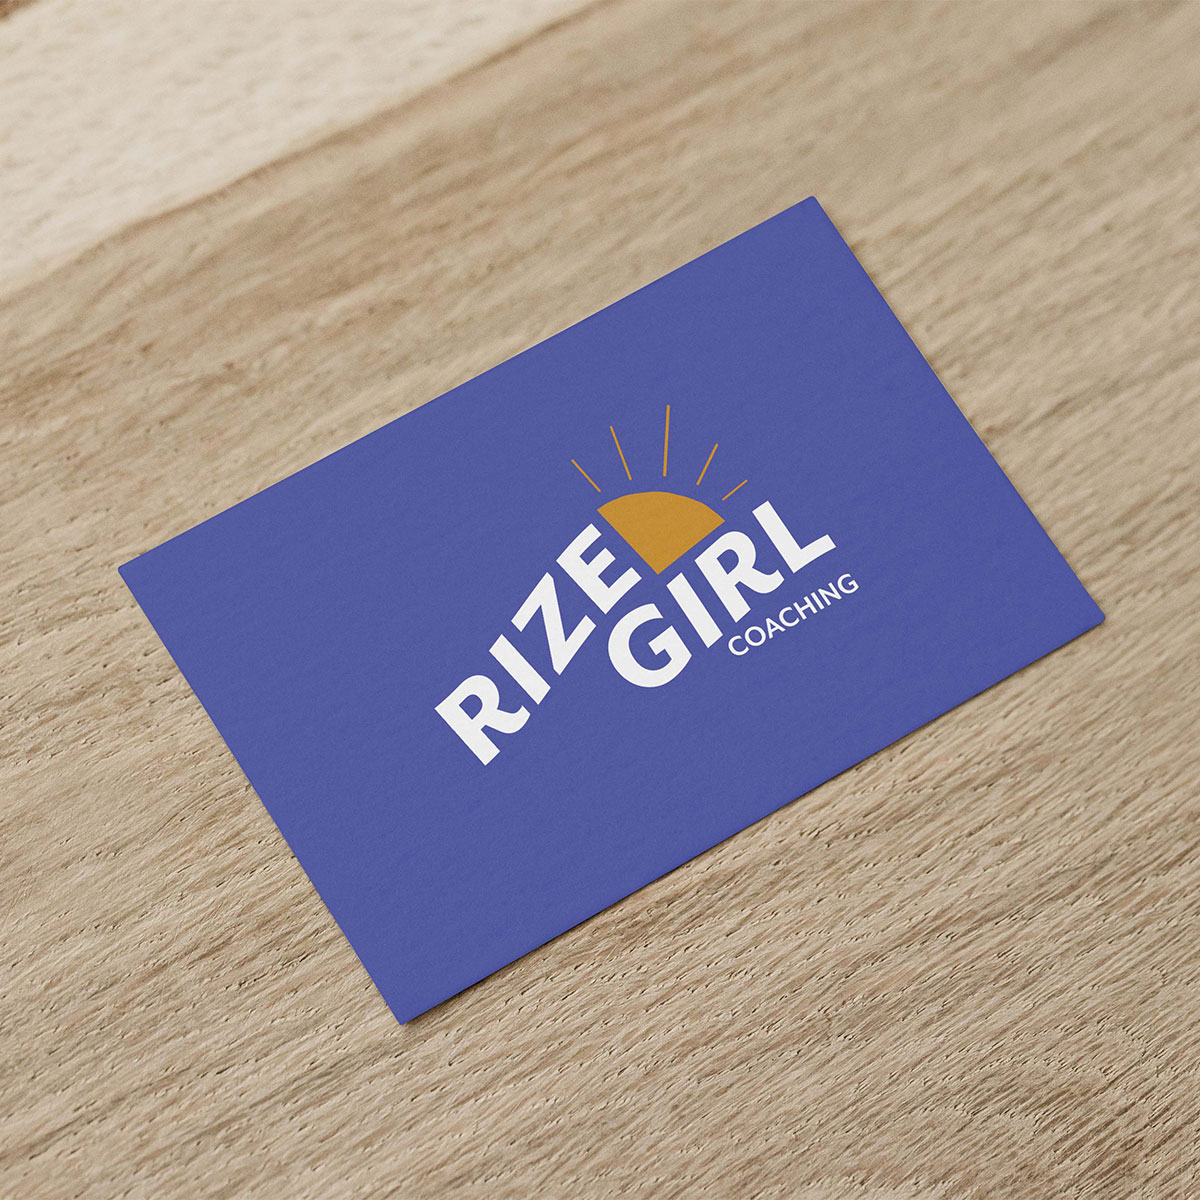 Rize Girl business card – by White Canvas Design